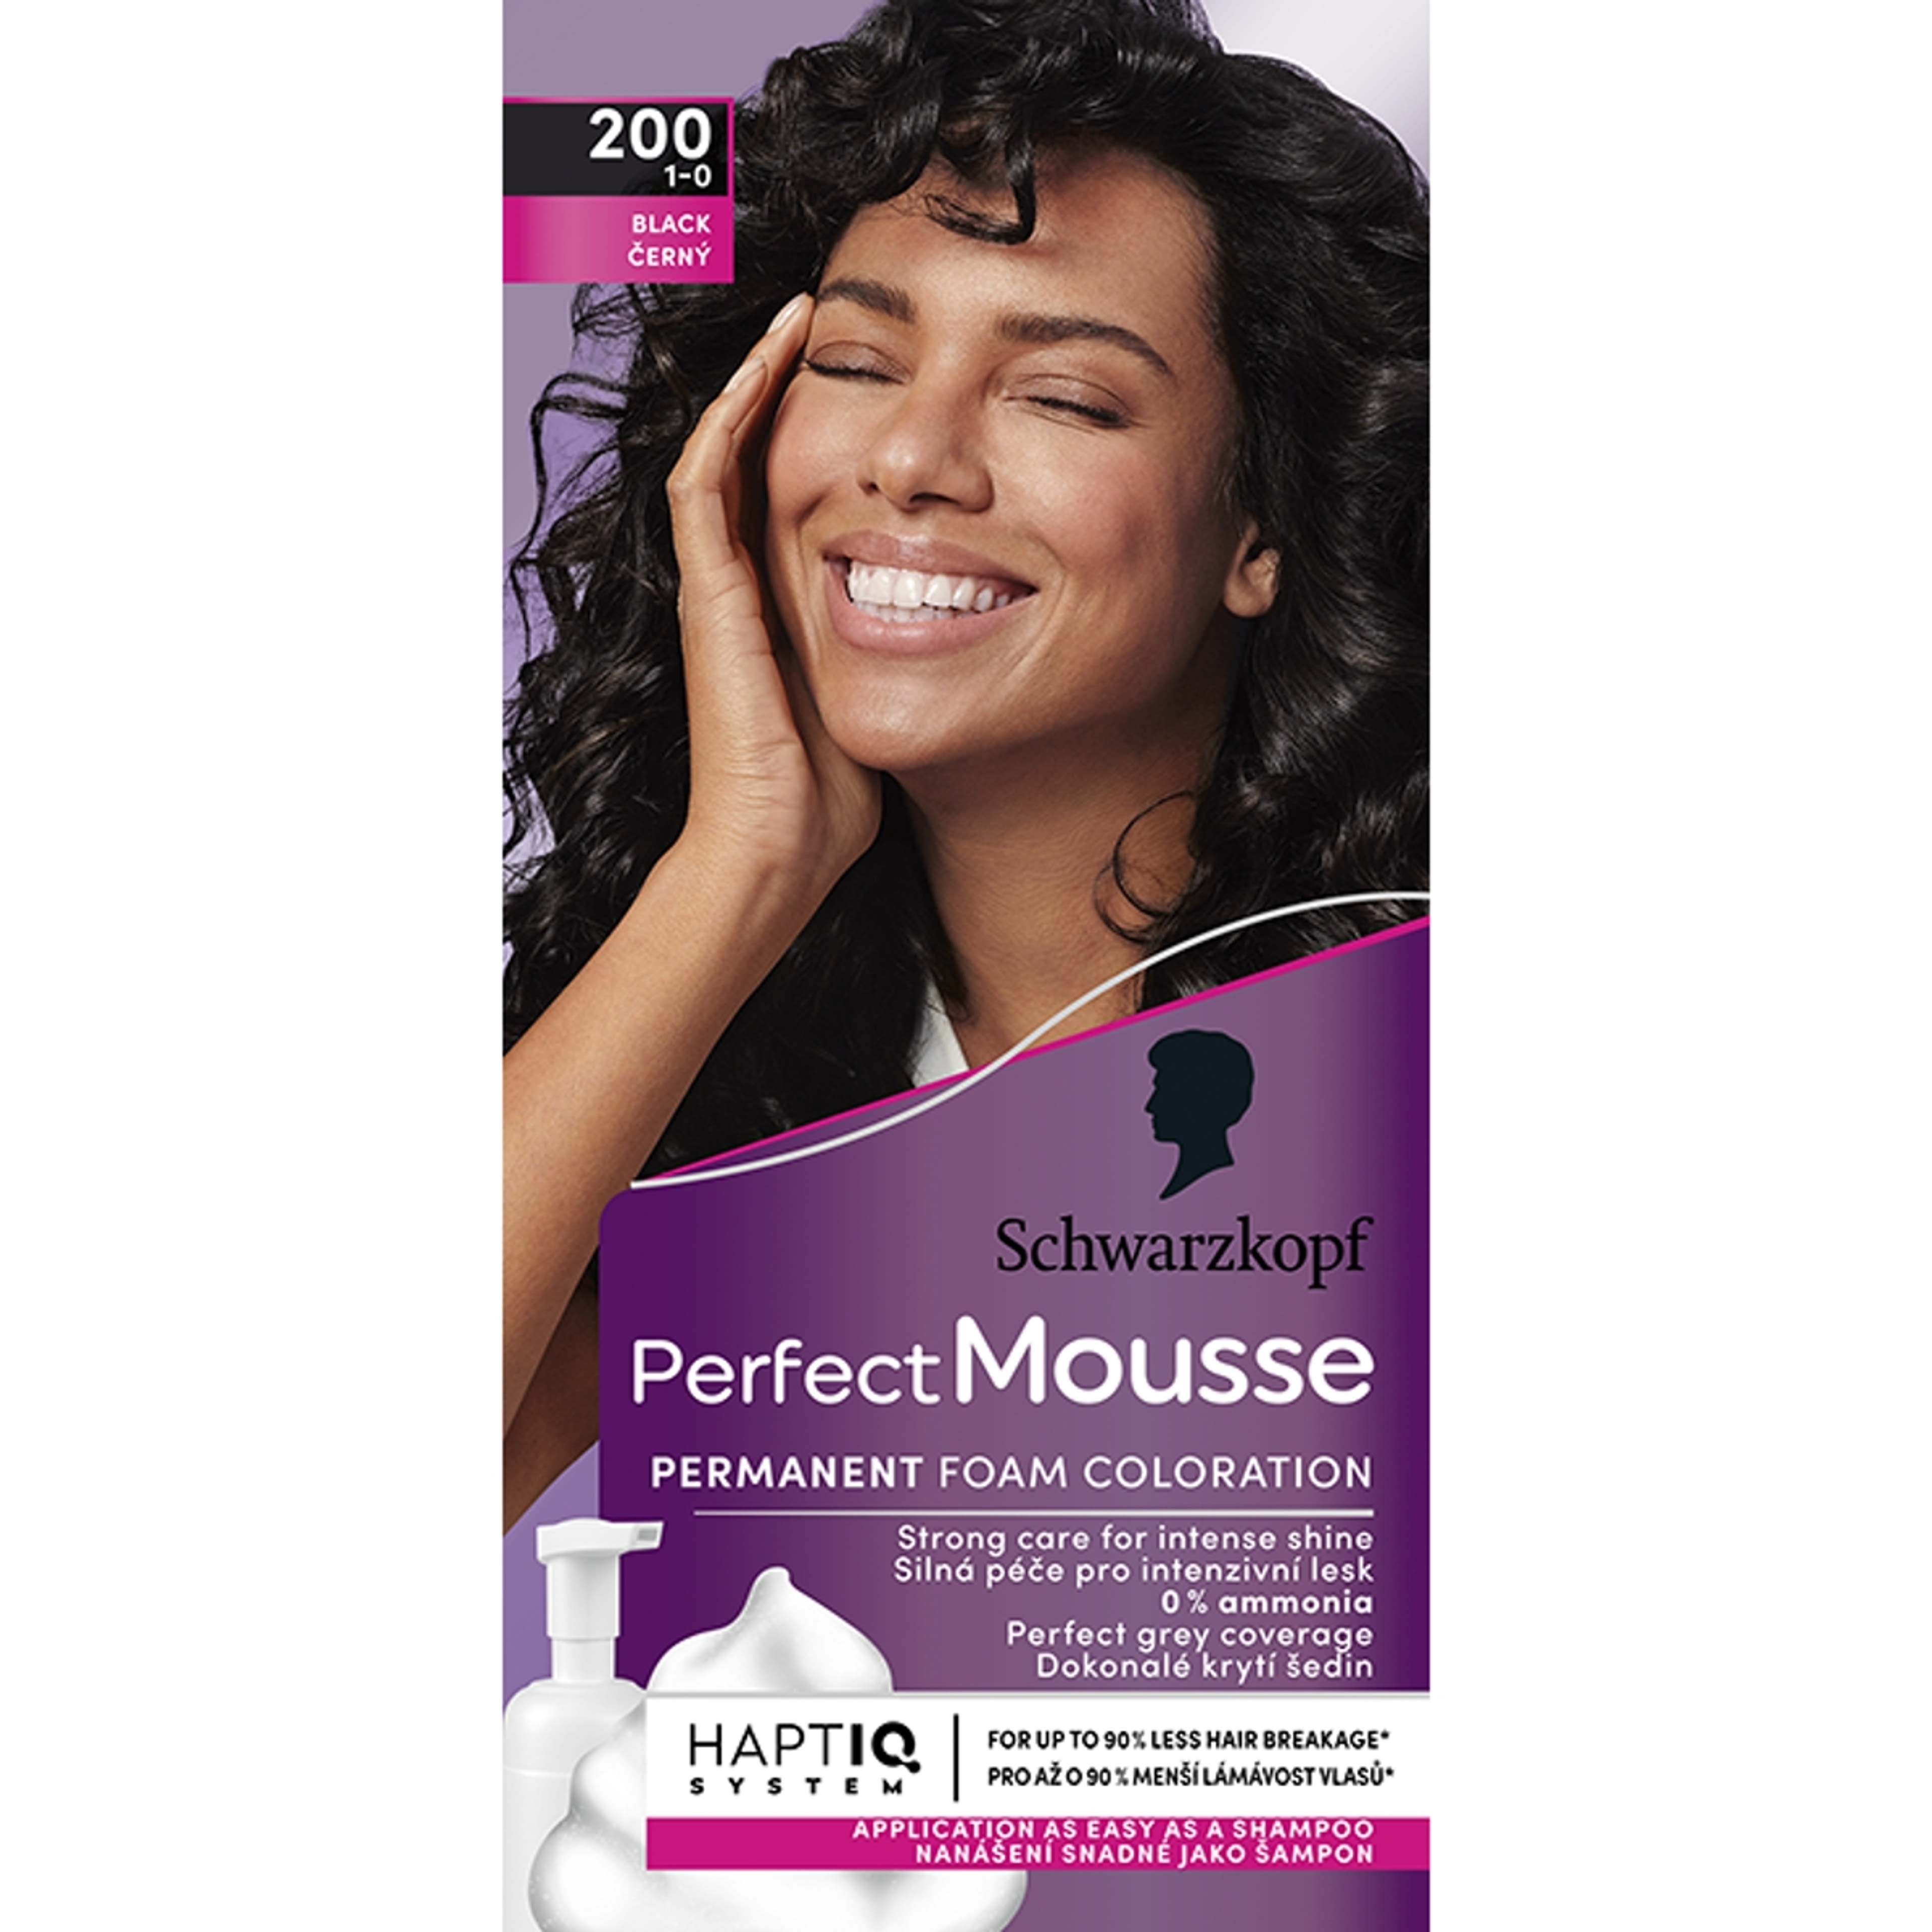 Perfect mousse 200 fekete - 1 db-1